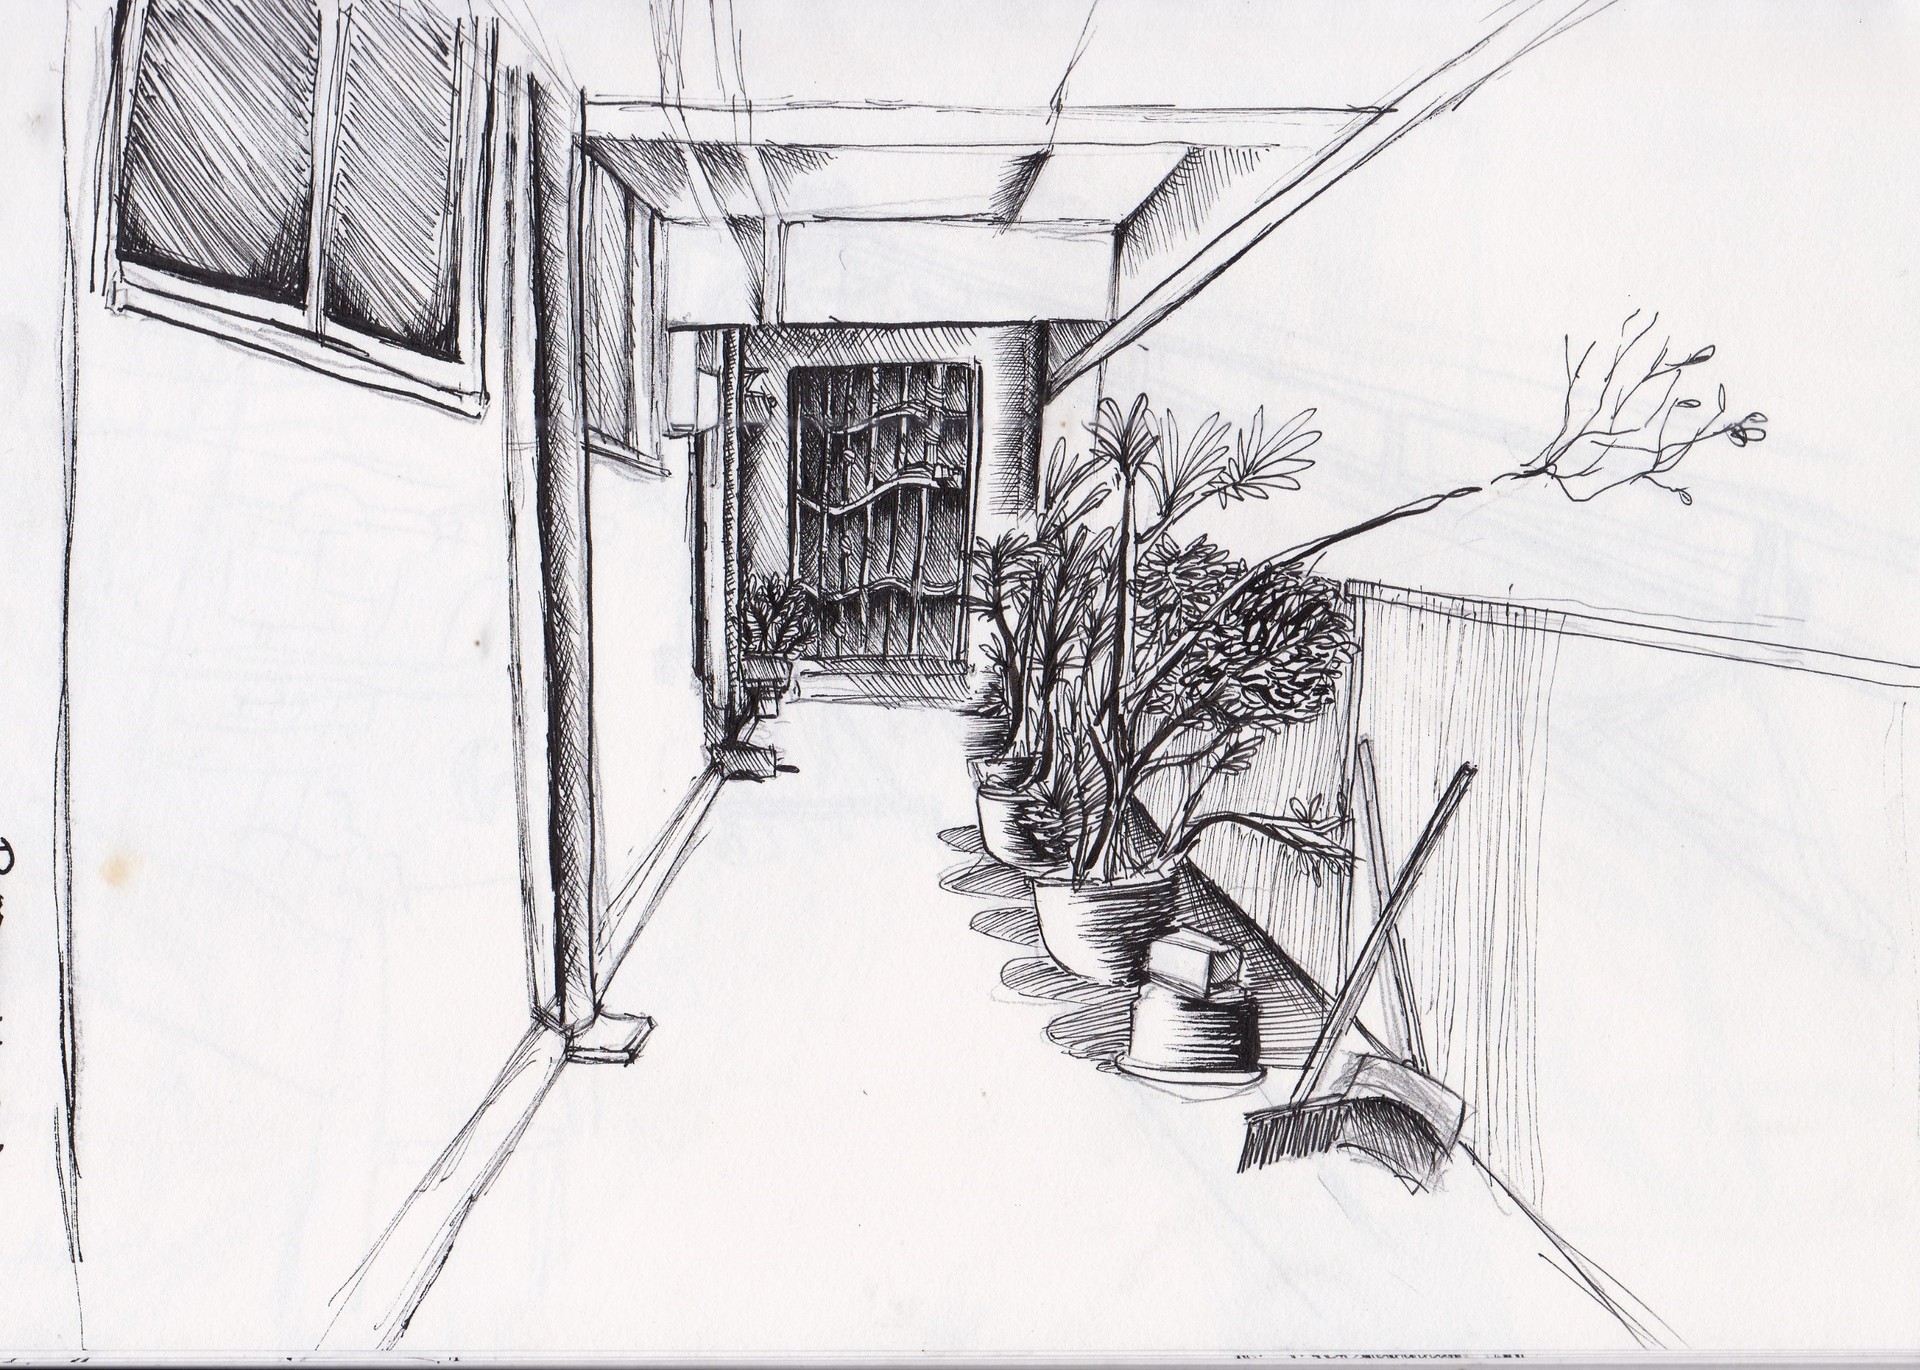 Perspective drawing (Drawing Fundamentals assignment) by Lim Kyra.